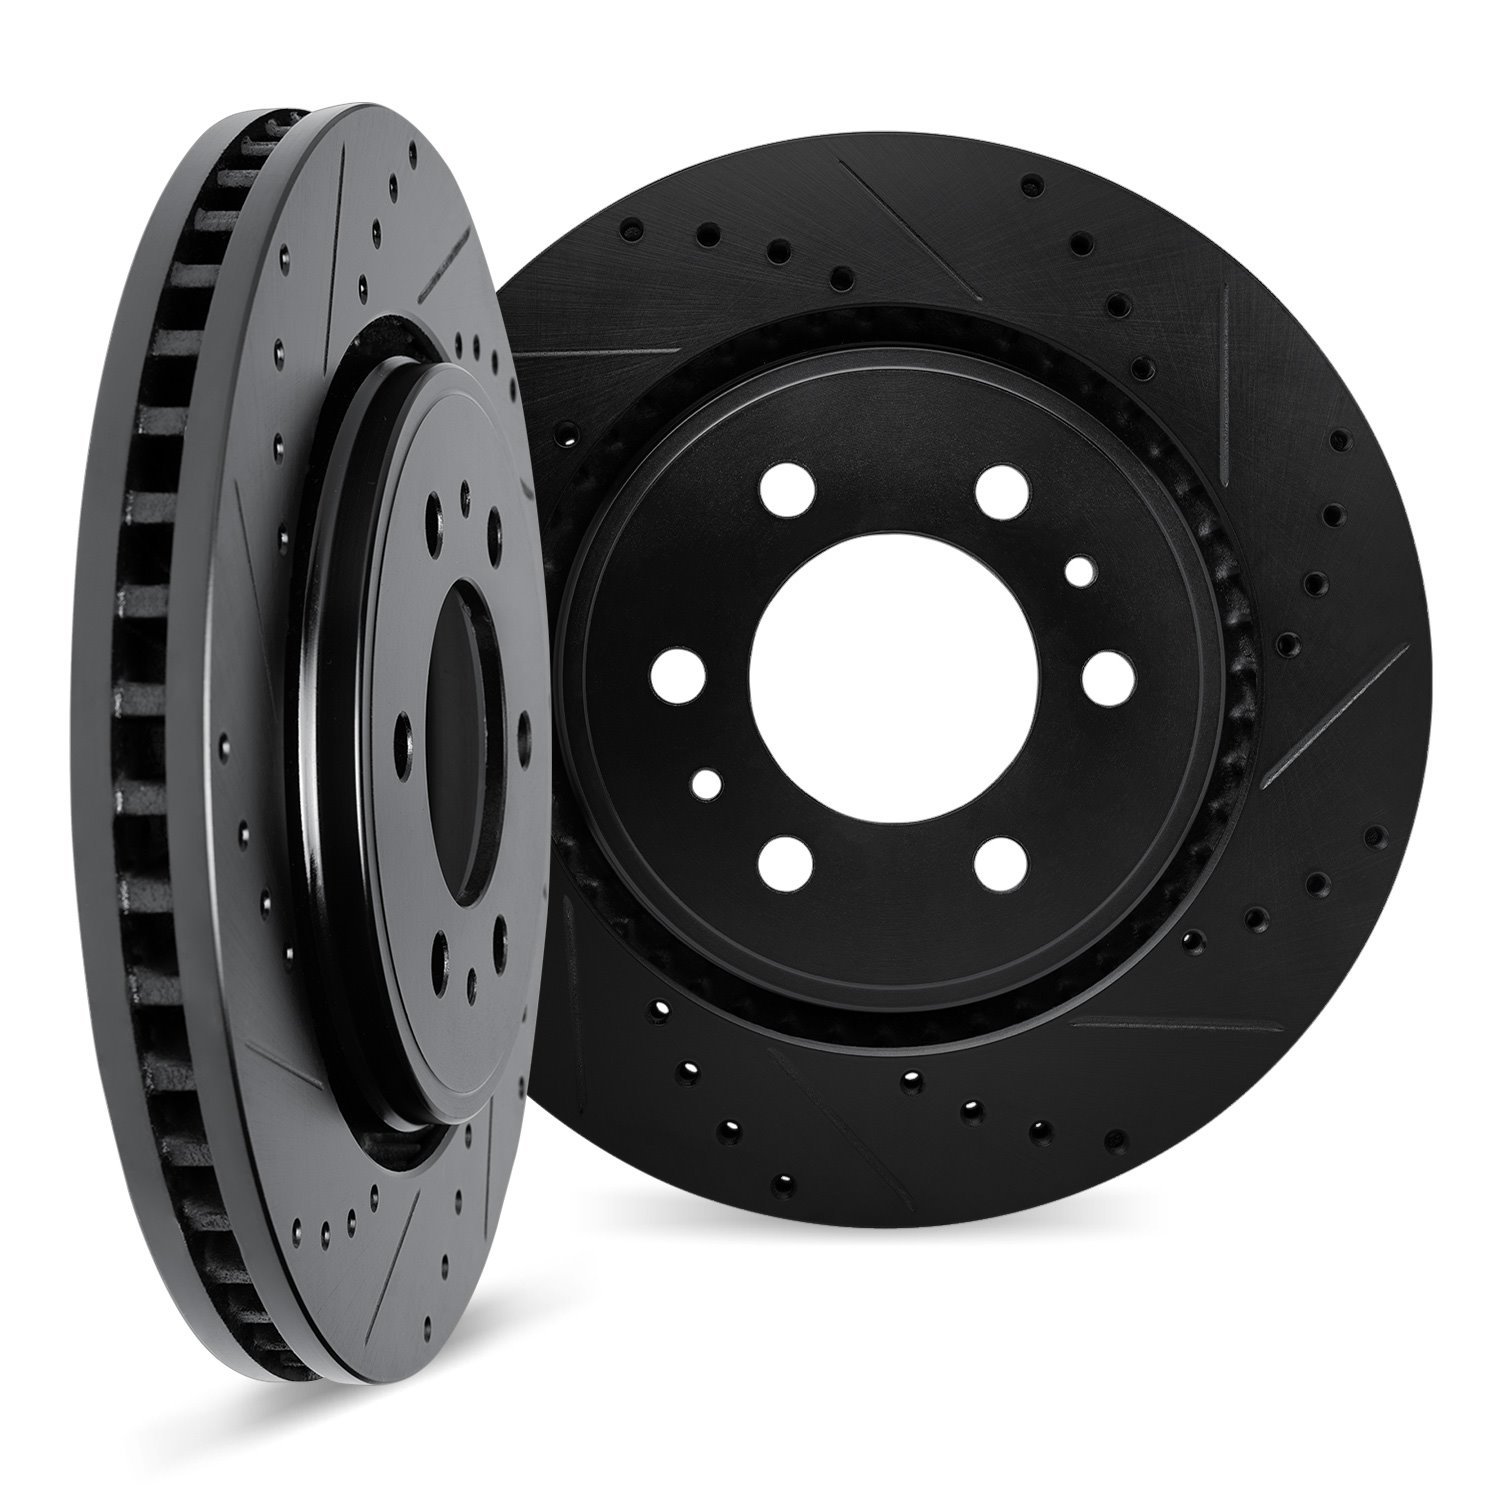 8002-67107 Drilled/Slotted Brake Rotors [Black], Fits Select Infiniti/Nissan, Position: Rear